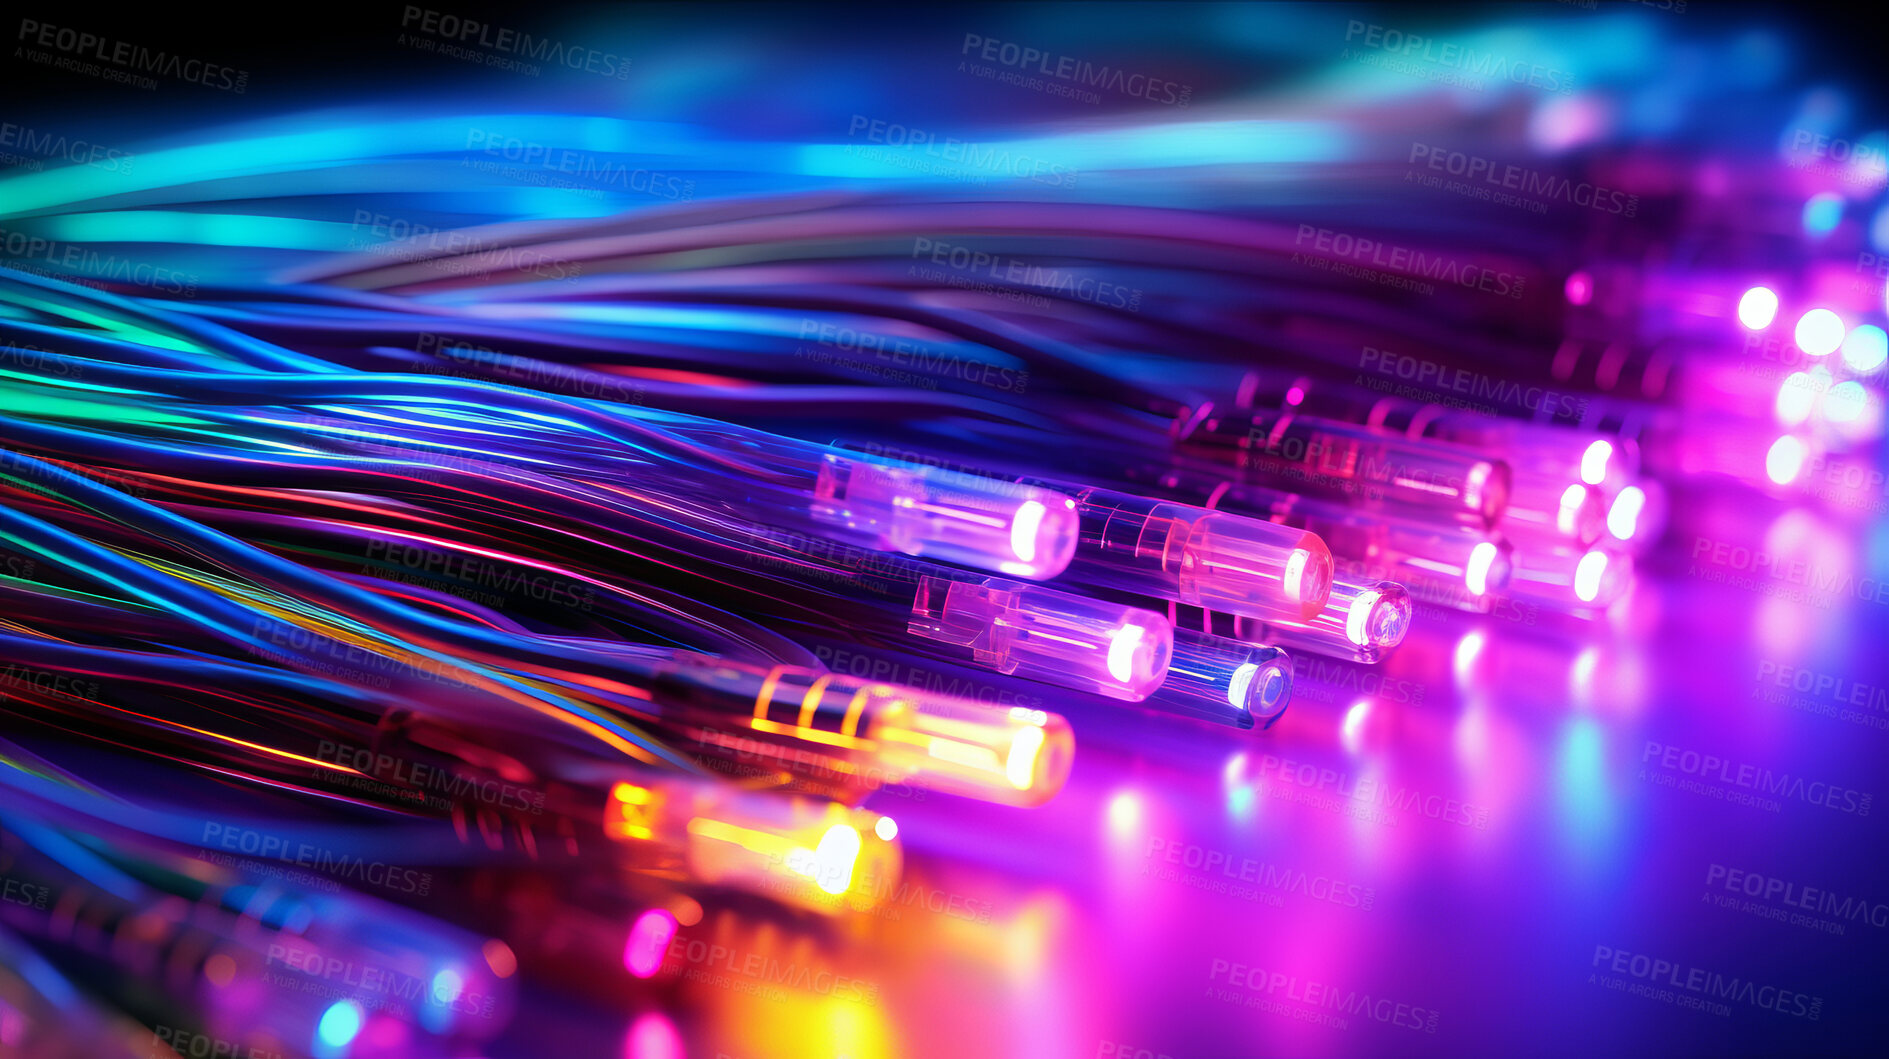 Buy stock photo Cables, wires or cords in colorful lights engineering, software programming or cybersecurity IT. Hardware, equipment or data center technology for cloud networking, database storage or backup